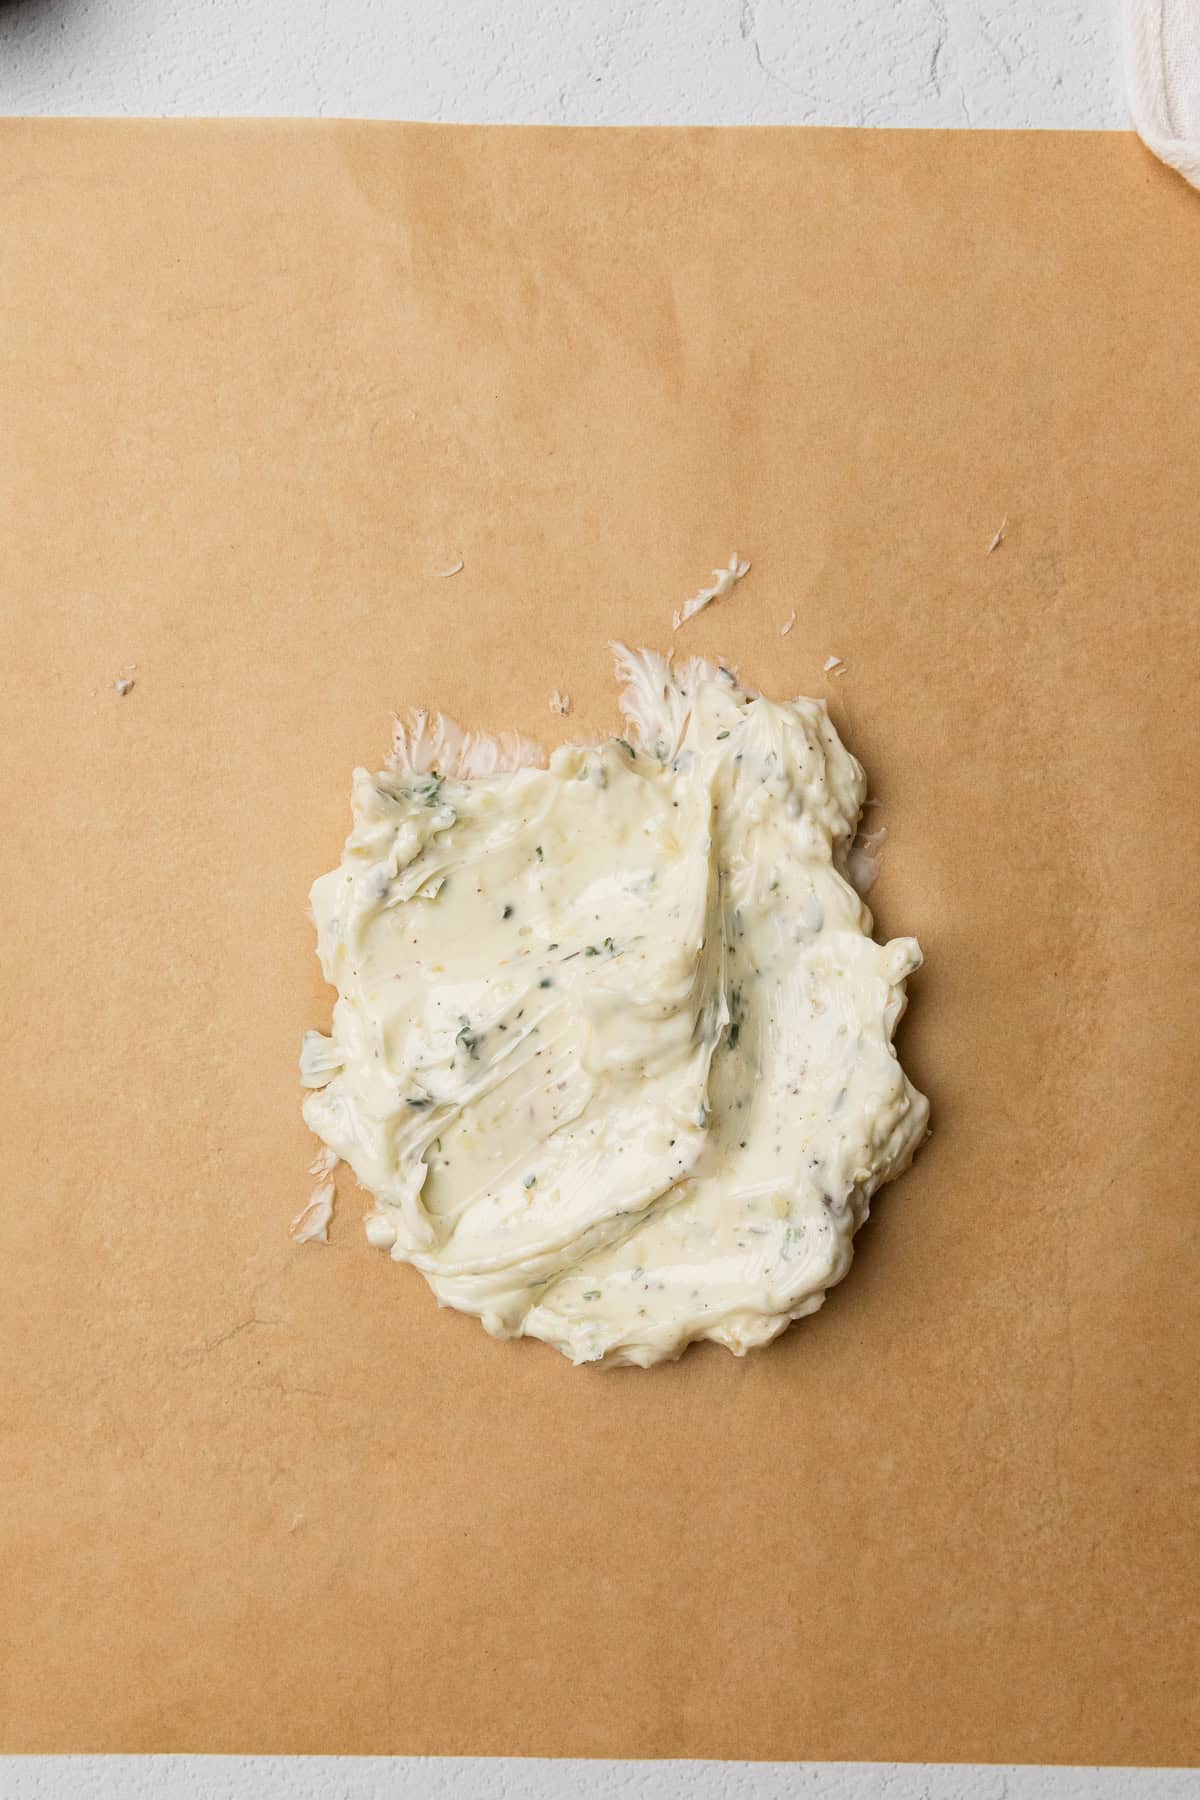 The herb garlic butter mixed up on piece of parchment paper.